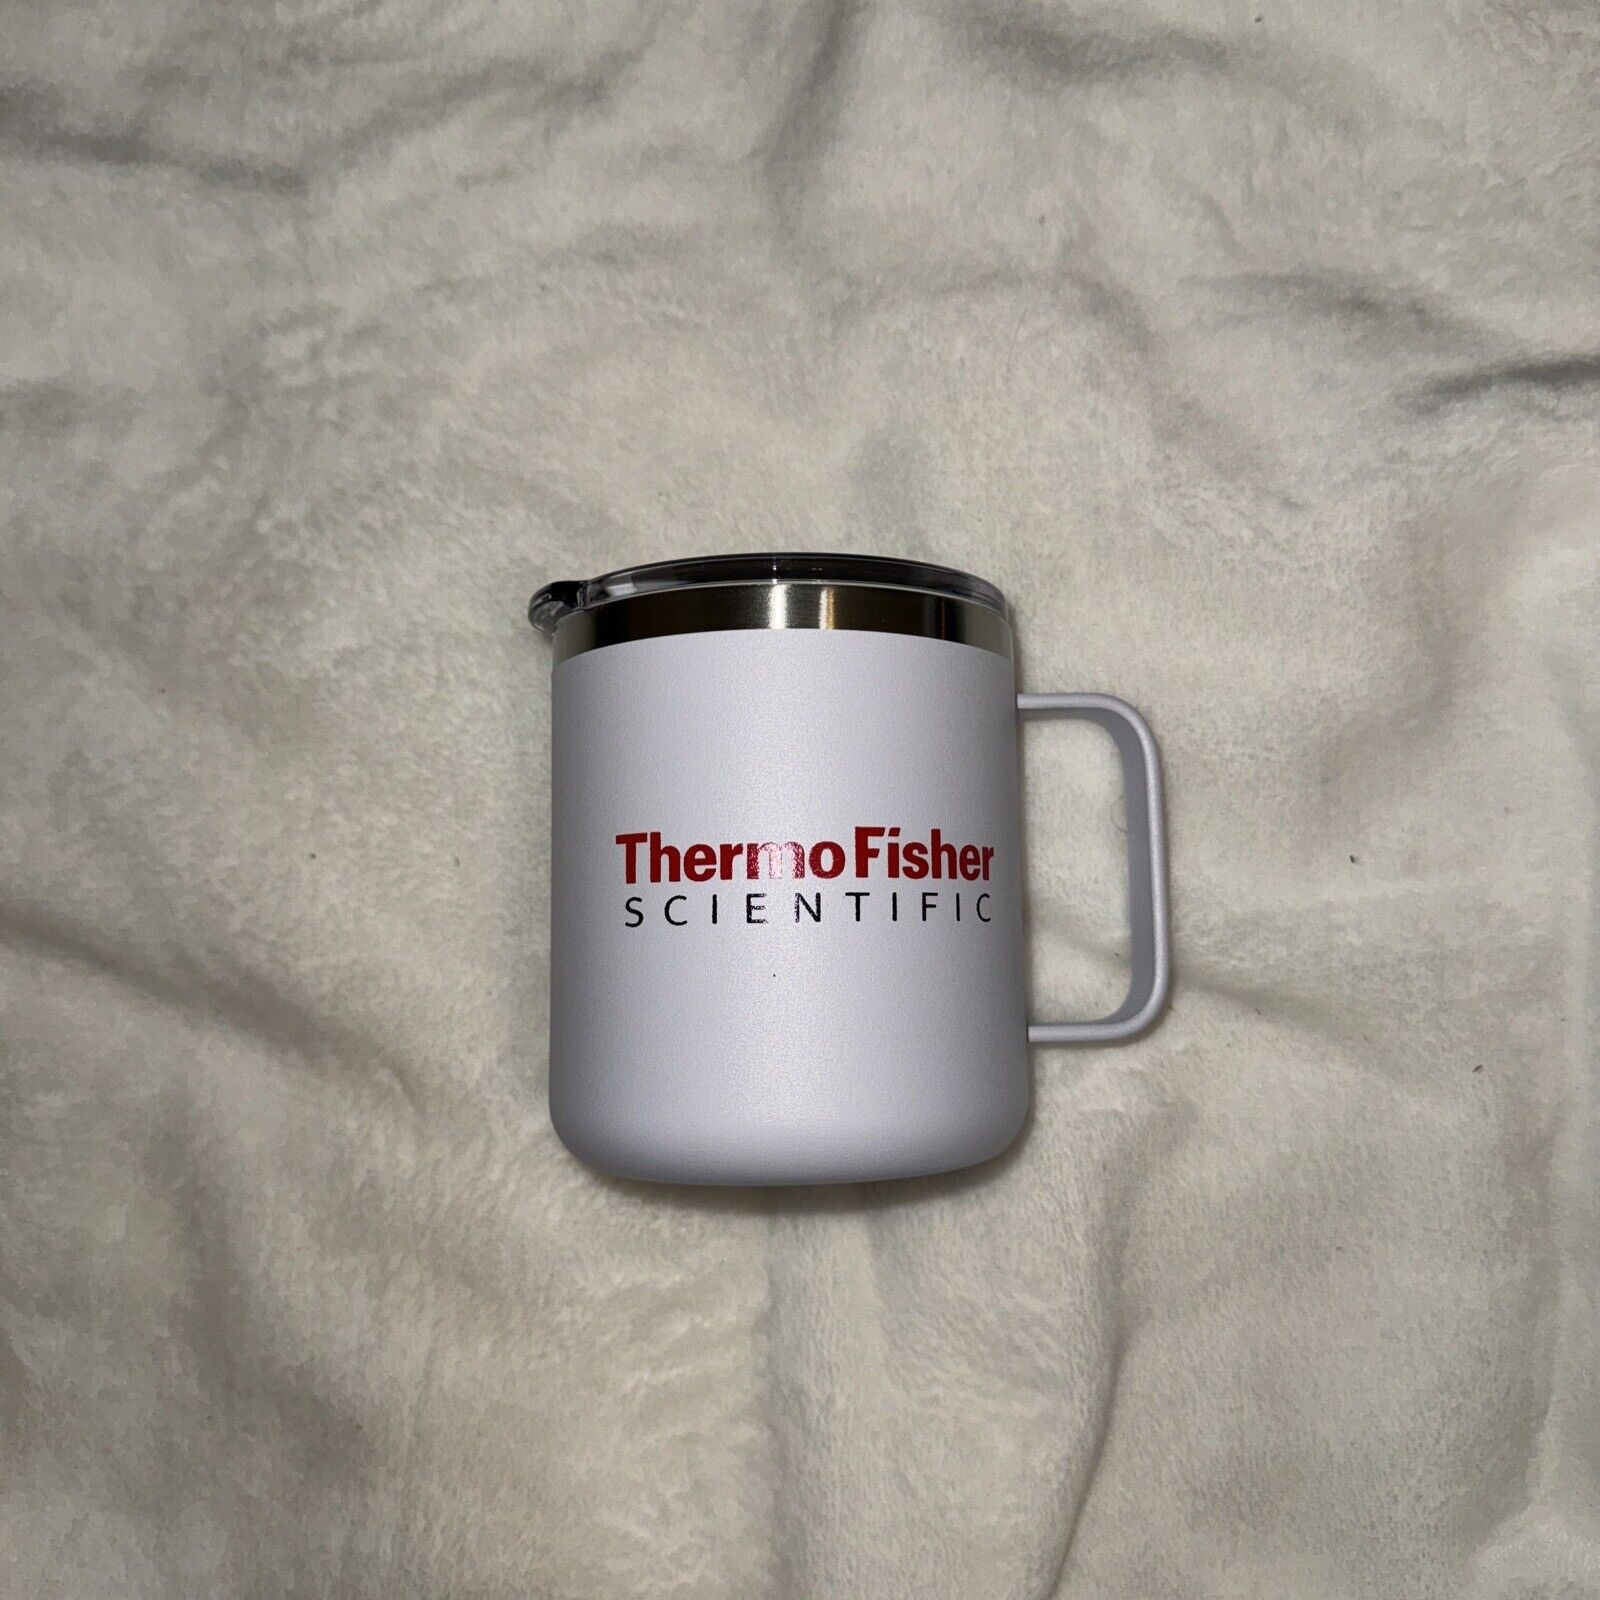 Thermofisher Camper Insulated Stainless Steel Coffee Mug